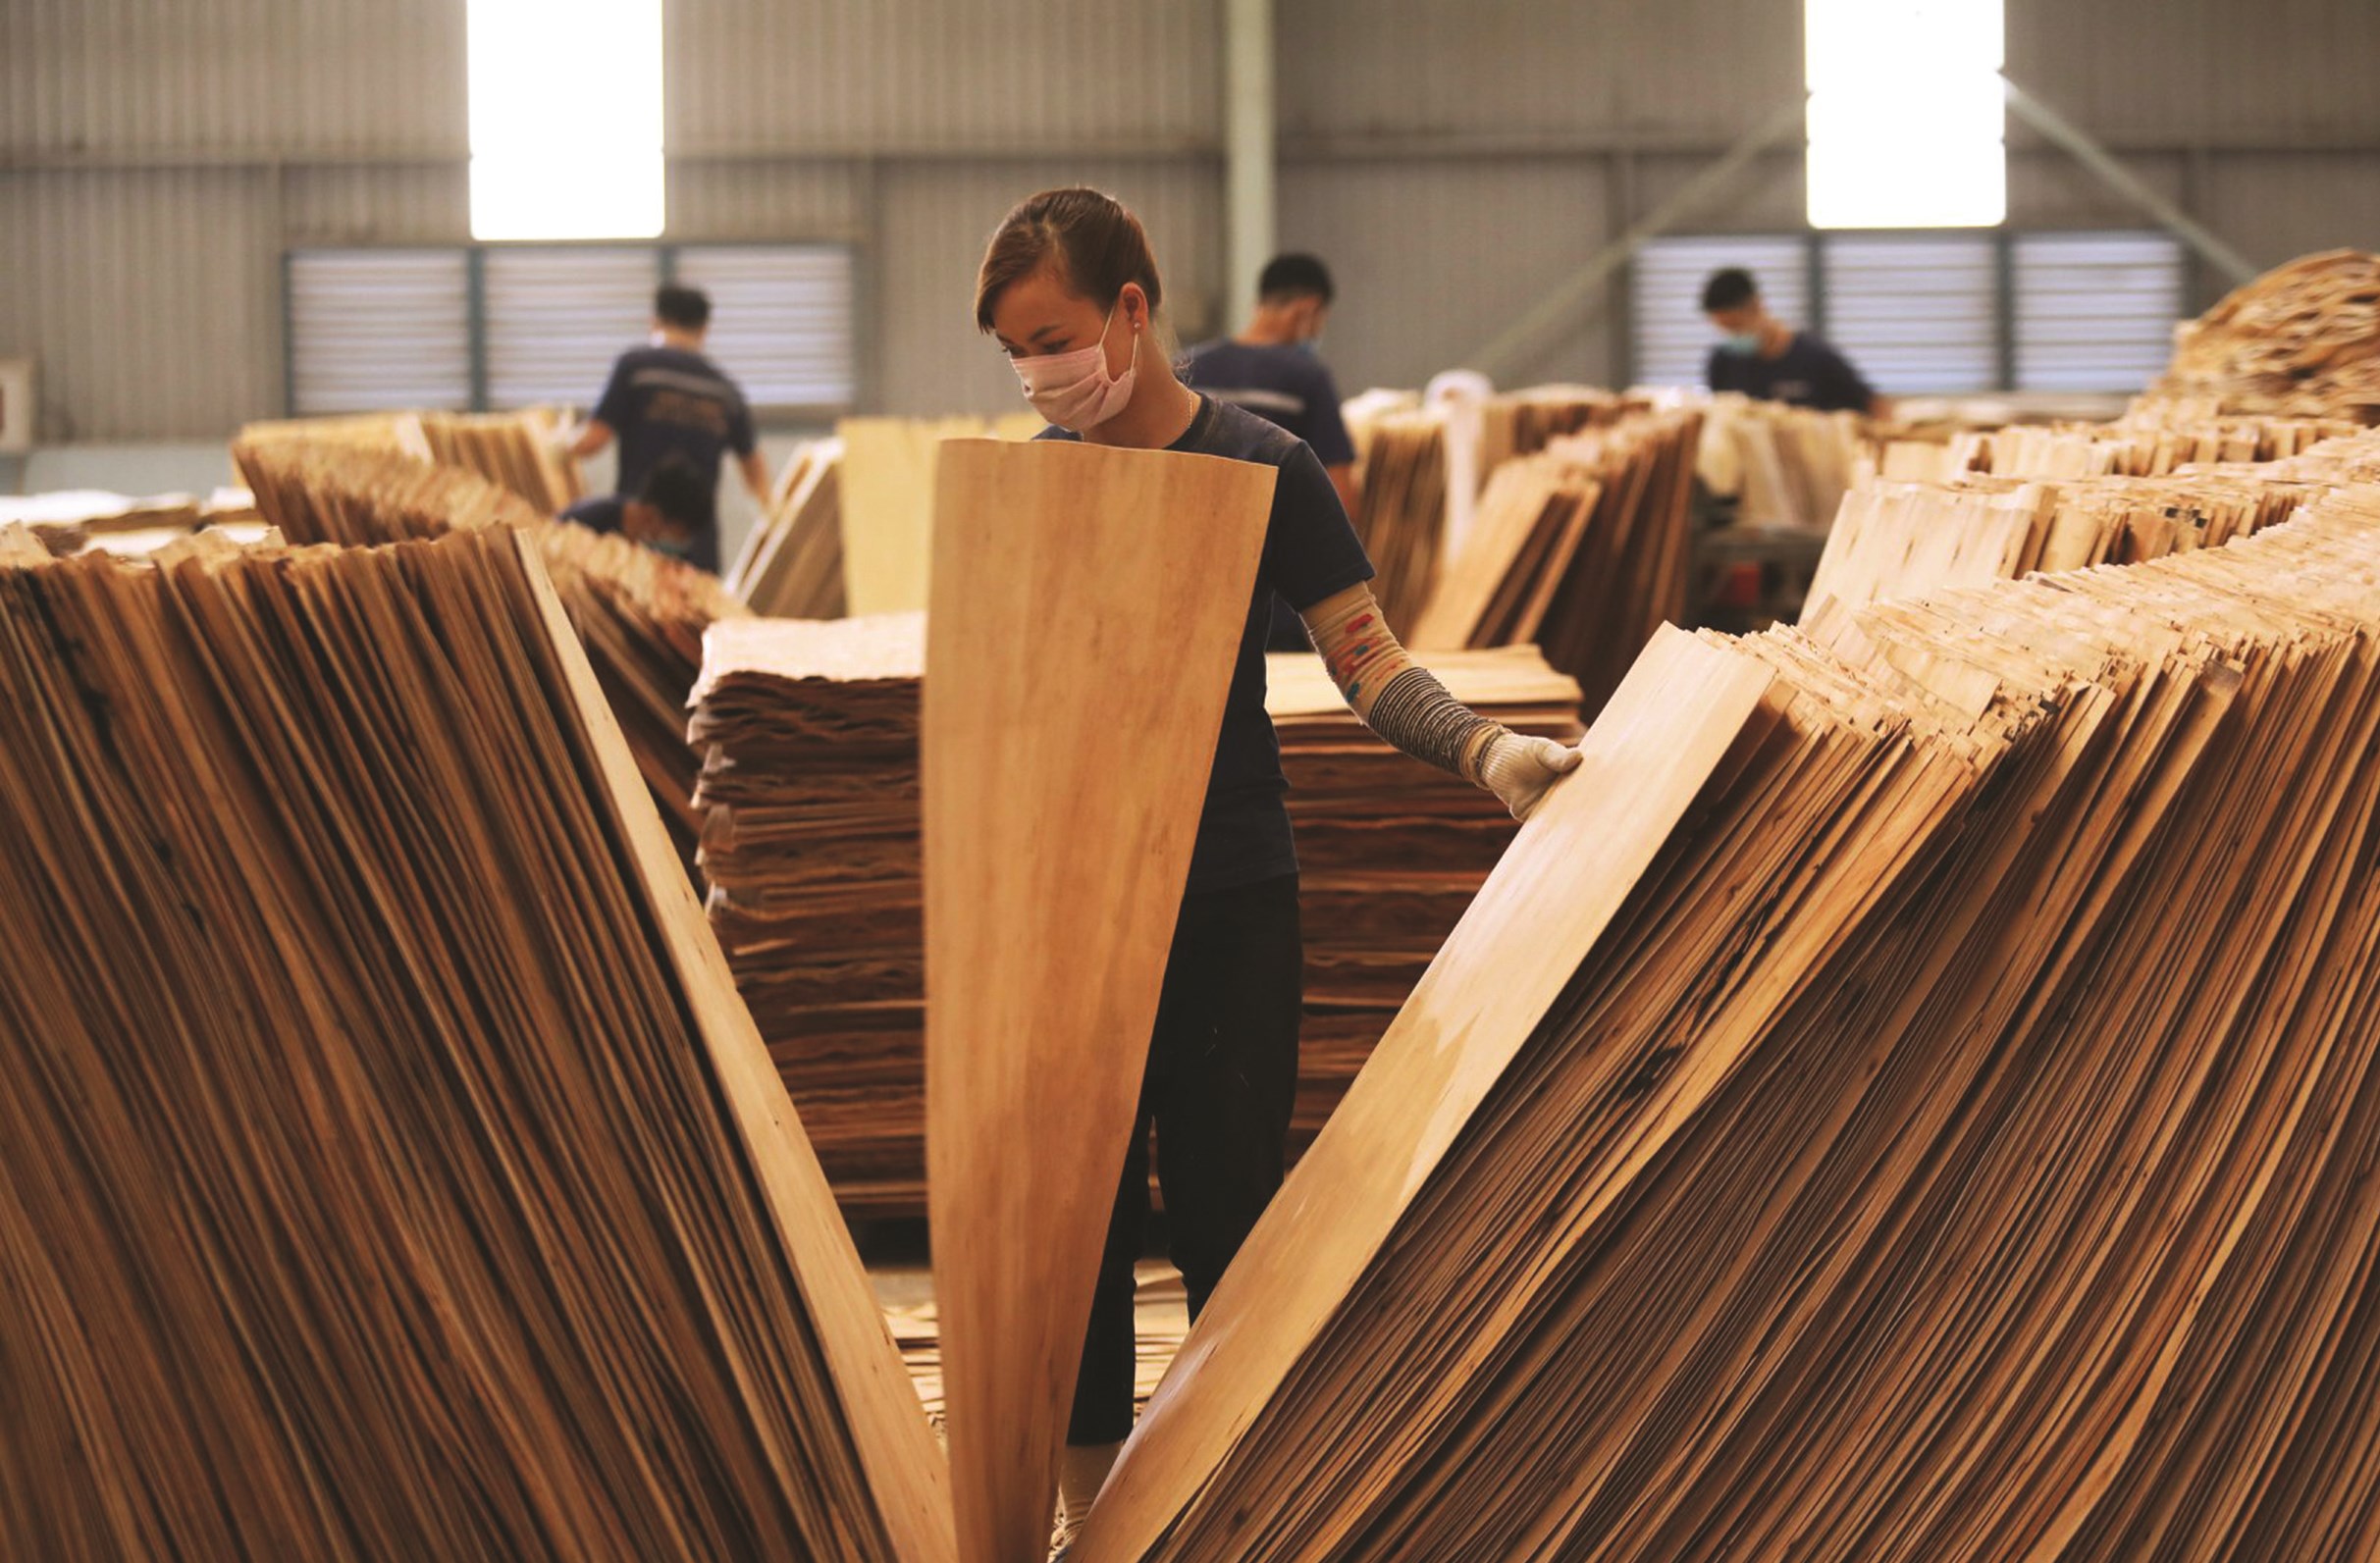 The wood industry is facing a big “wave”.